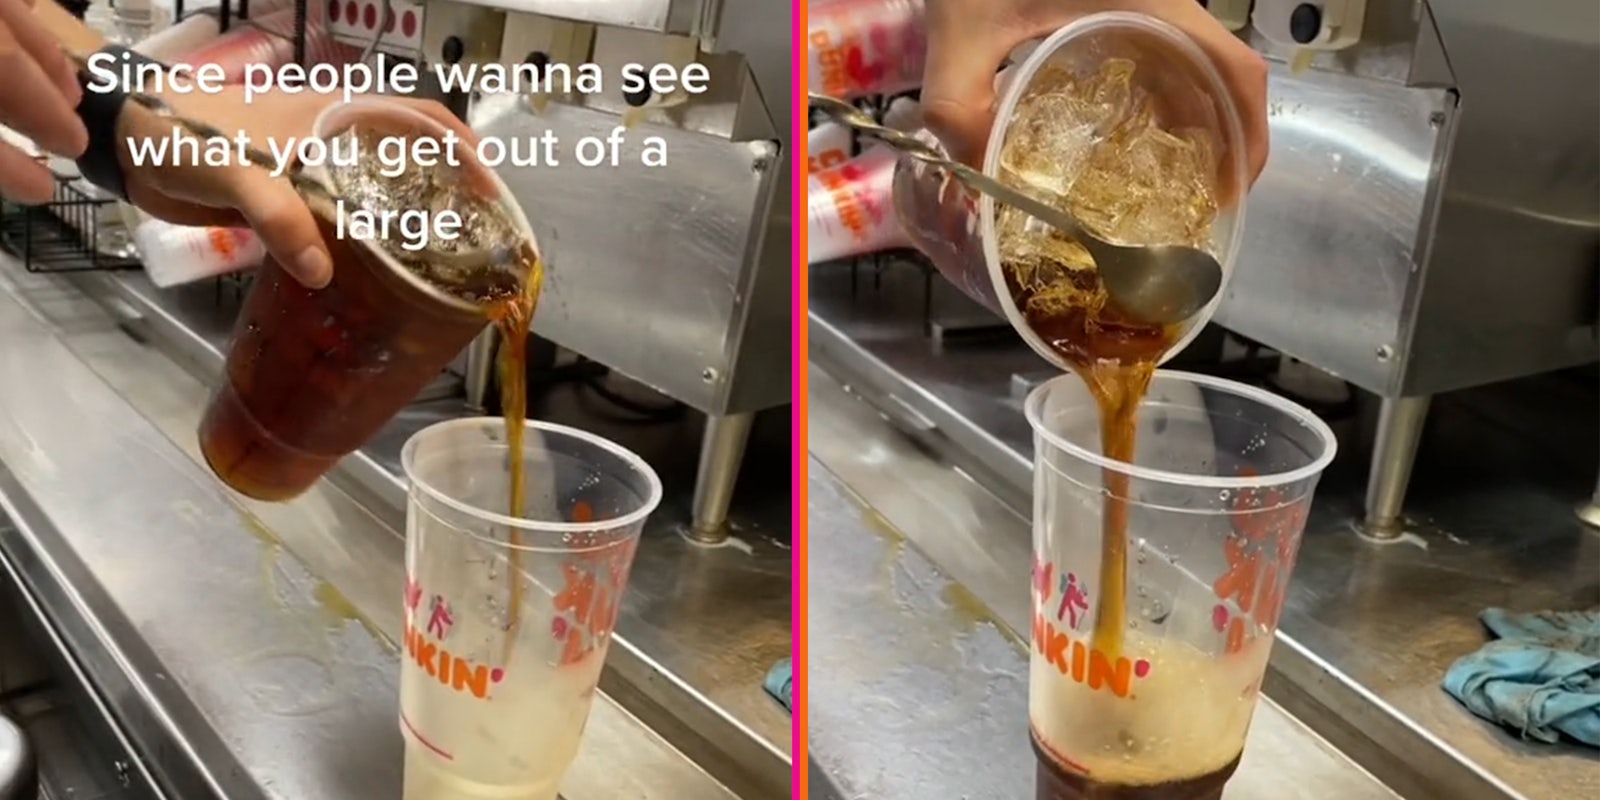 hand pouring large coffee into empty cup with caption 'Since people wanna see what you get out of a large' (l) spoon holding back ice as coffee pours into cup (r)